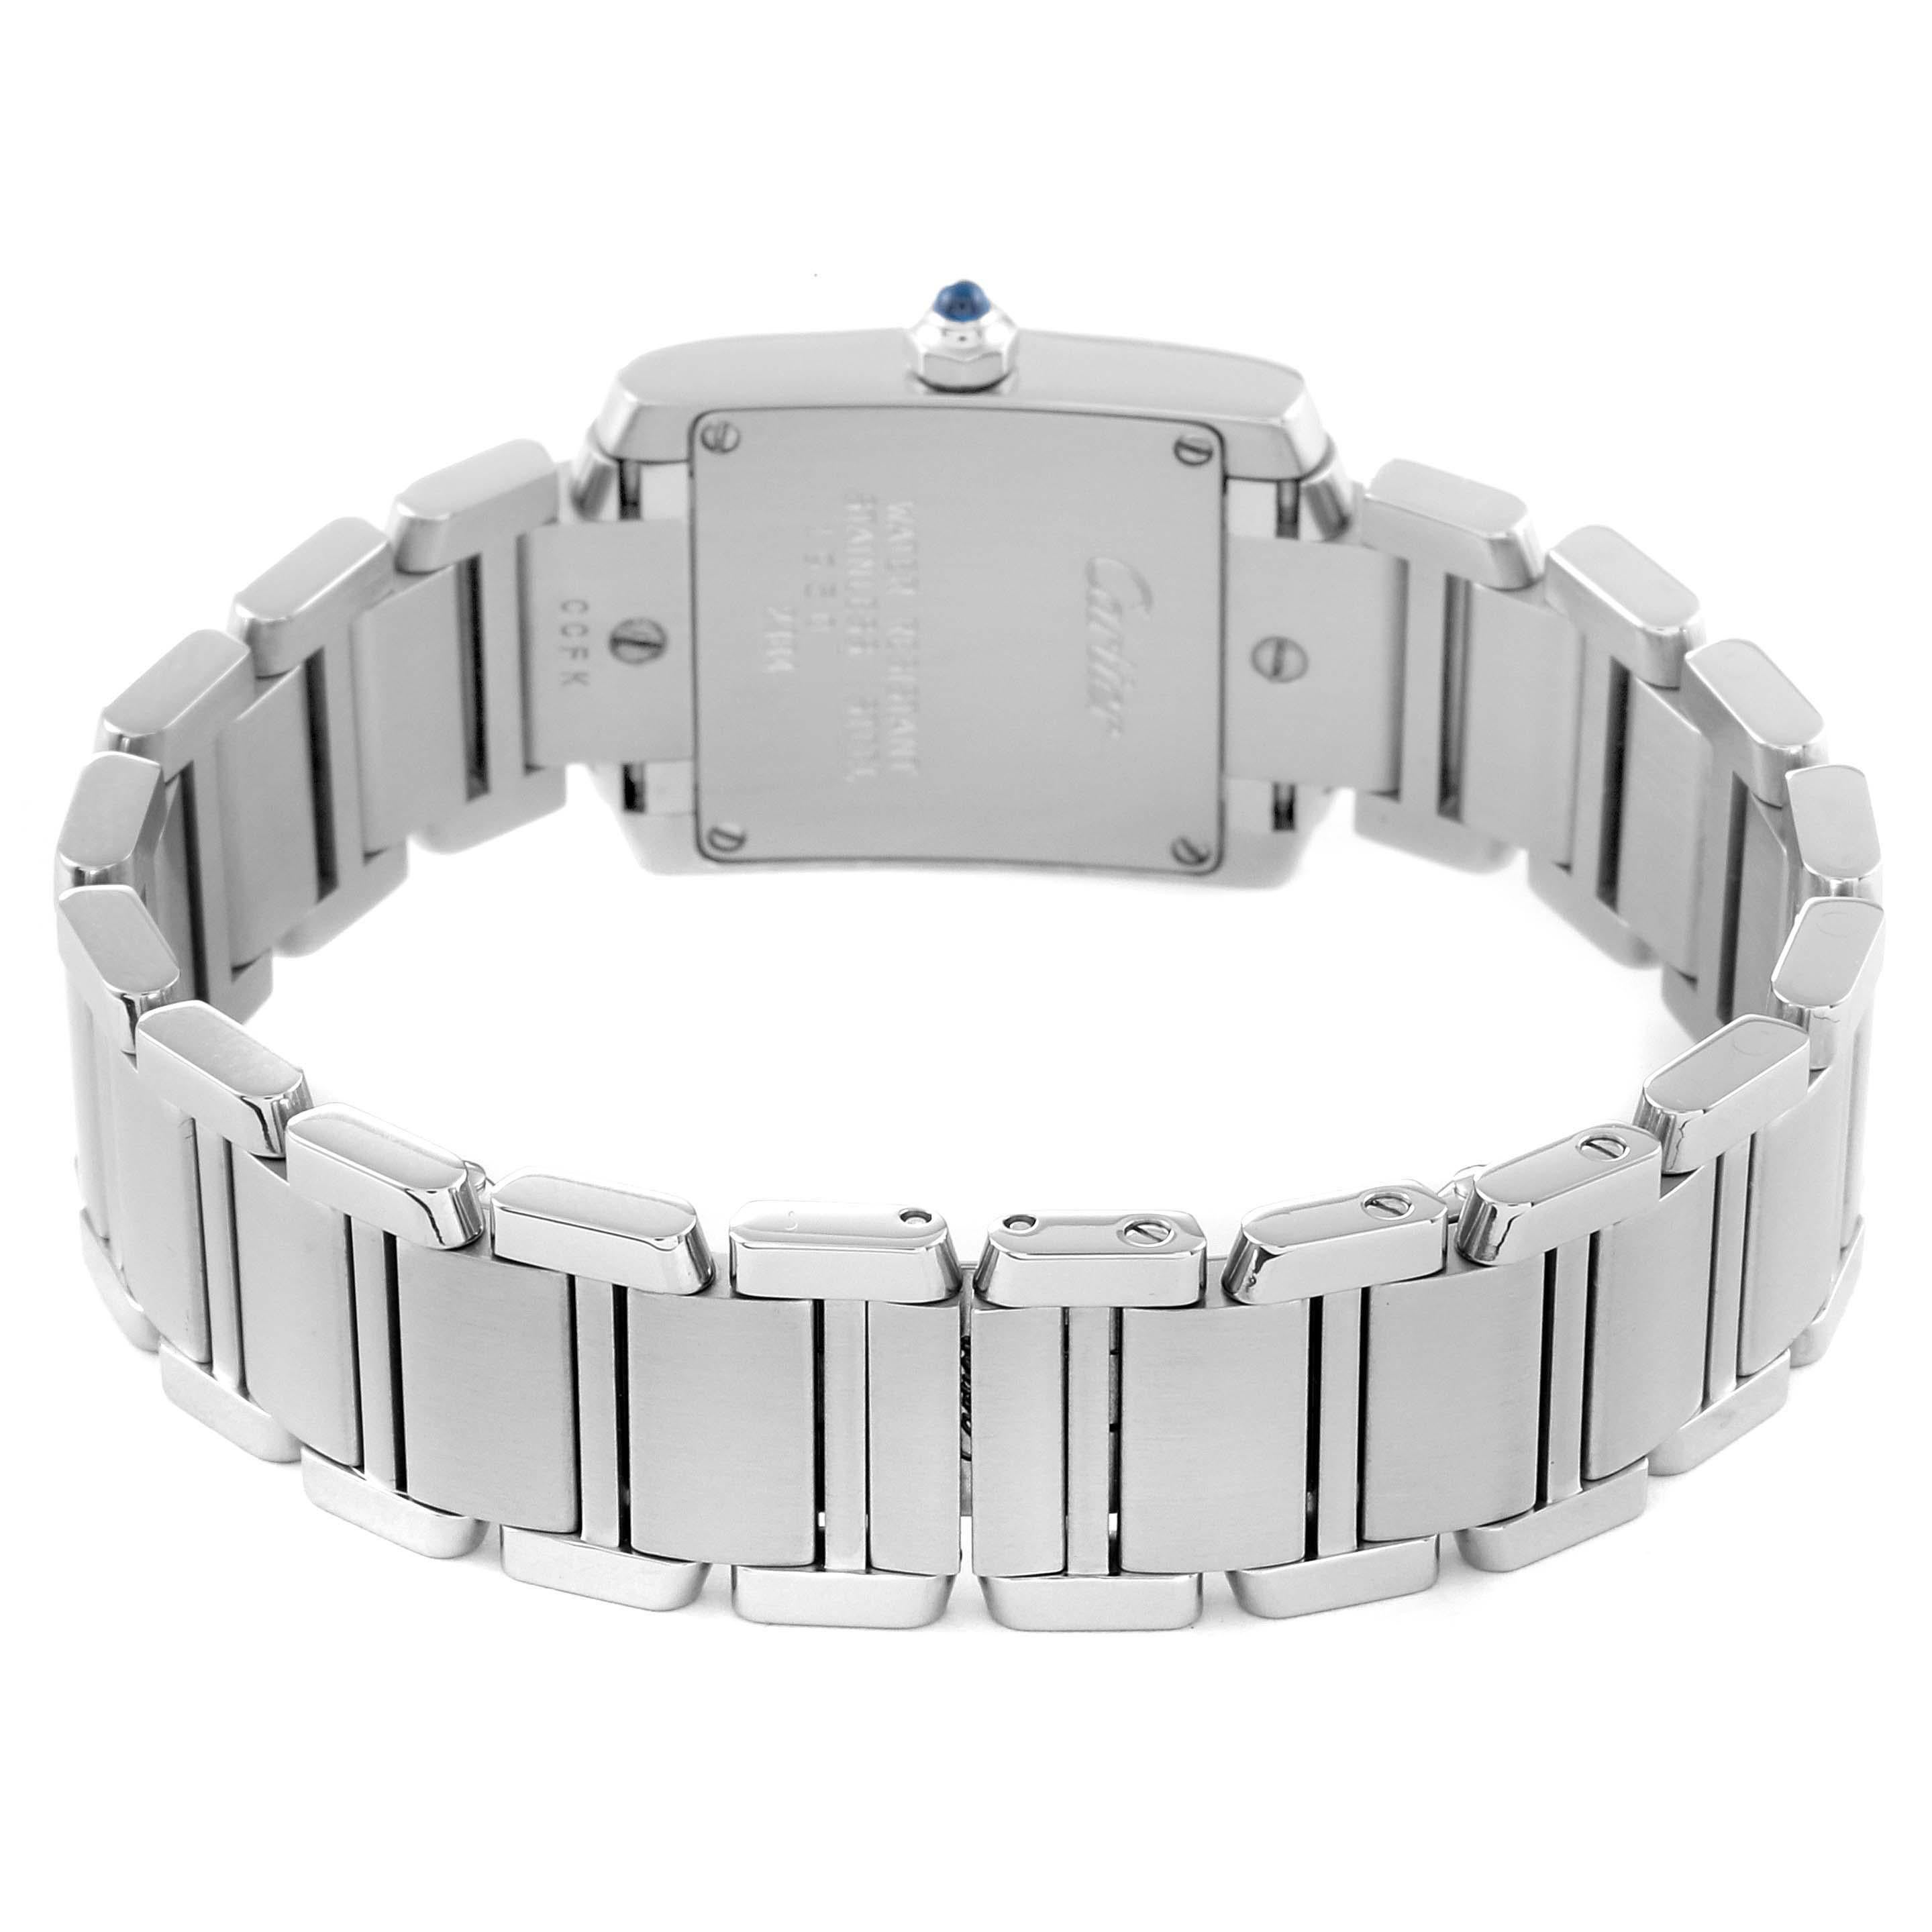 Cartier Tank Francaise Small Silver Dial Steel Ladies Watch W51008Q3 3